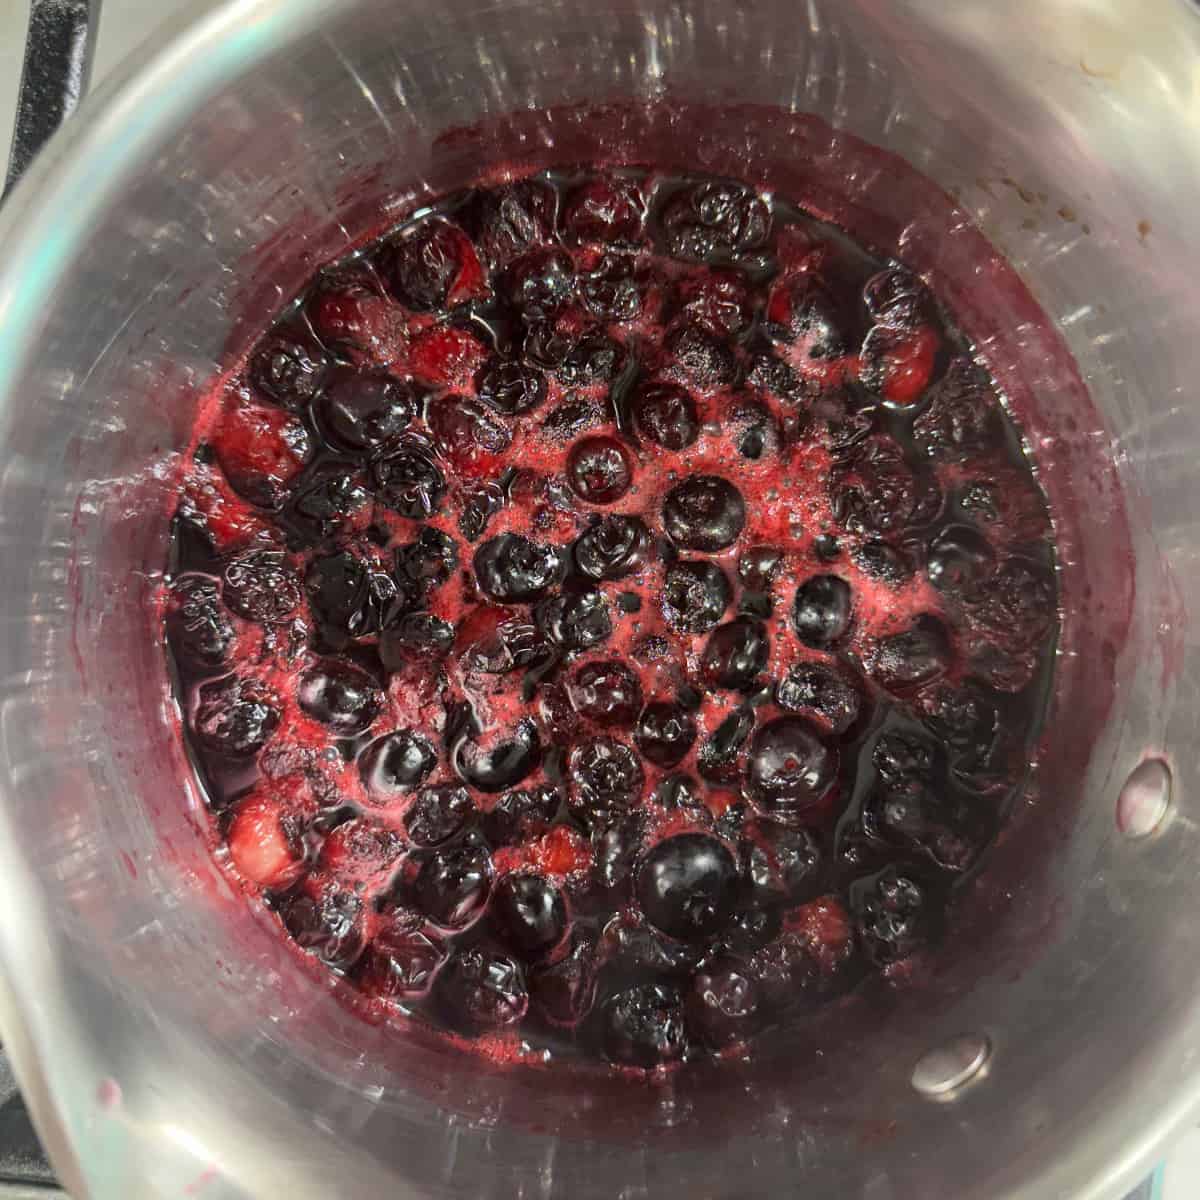 Blueberries simmering in a pot